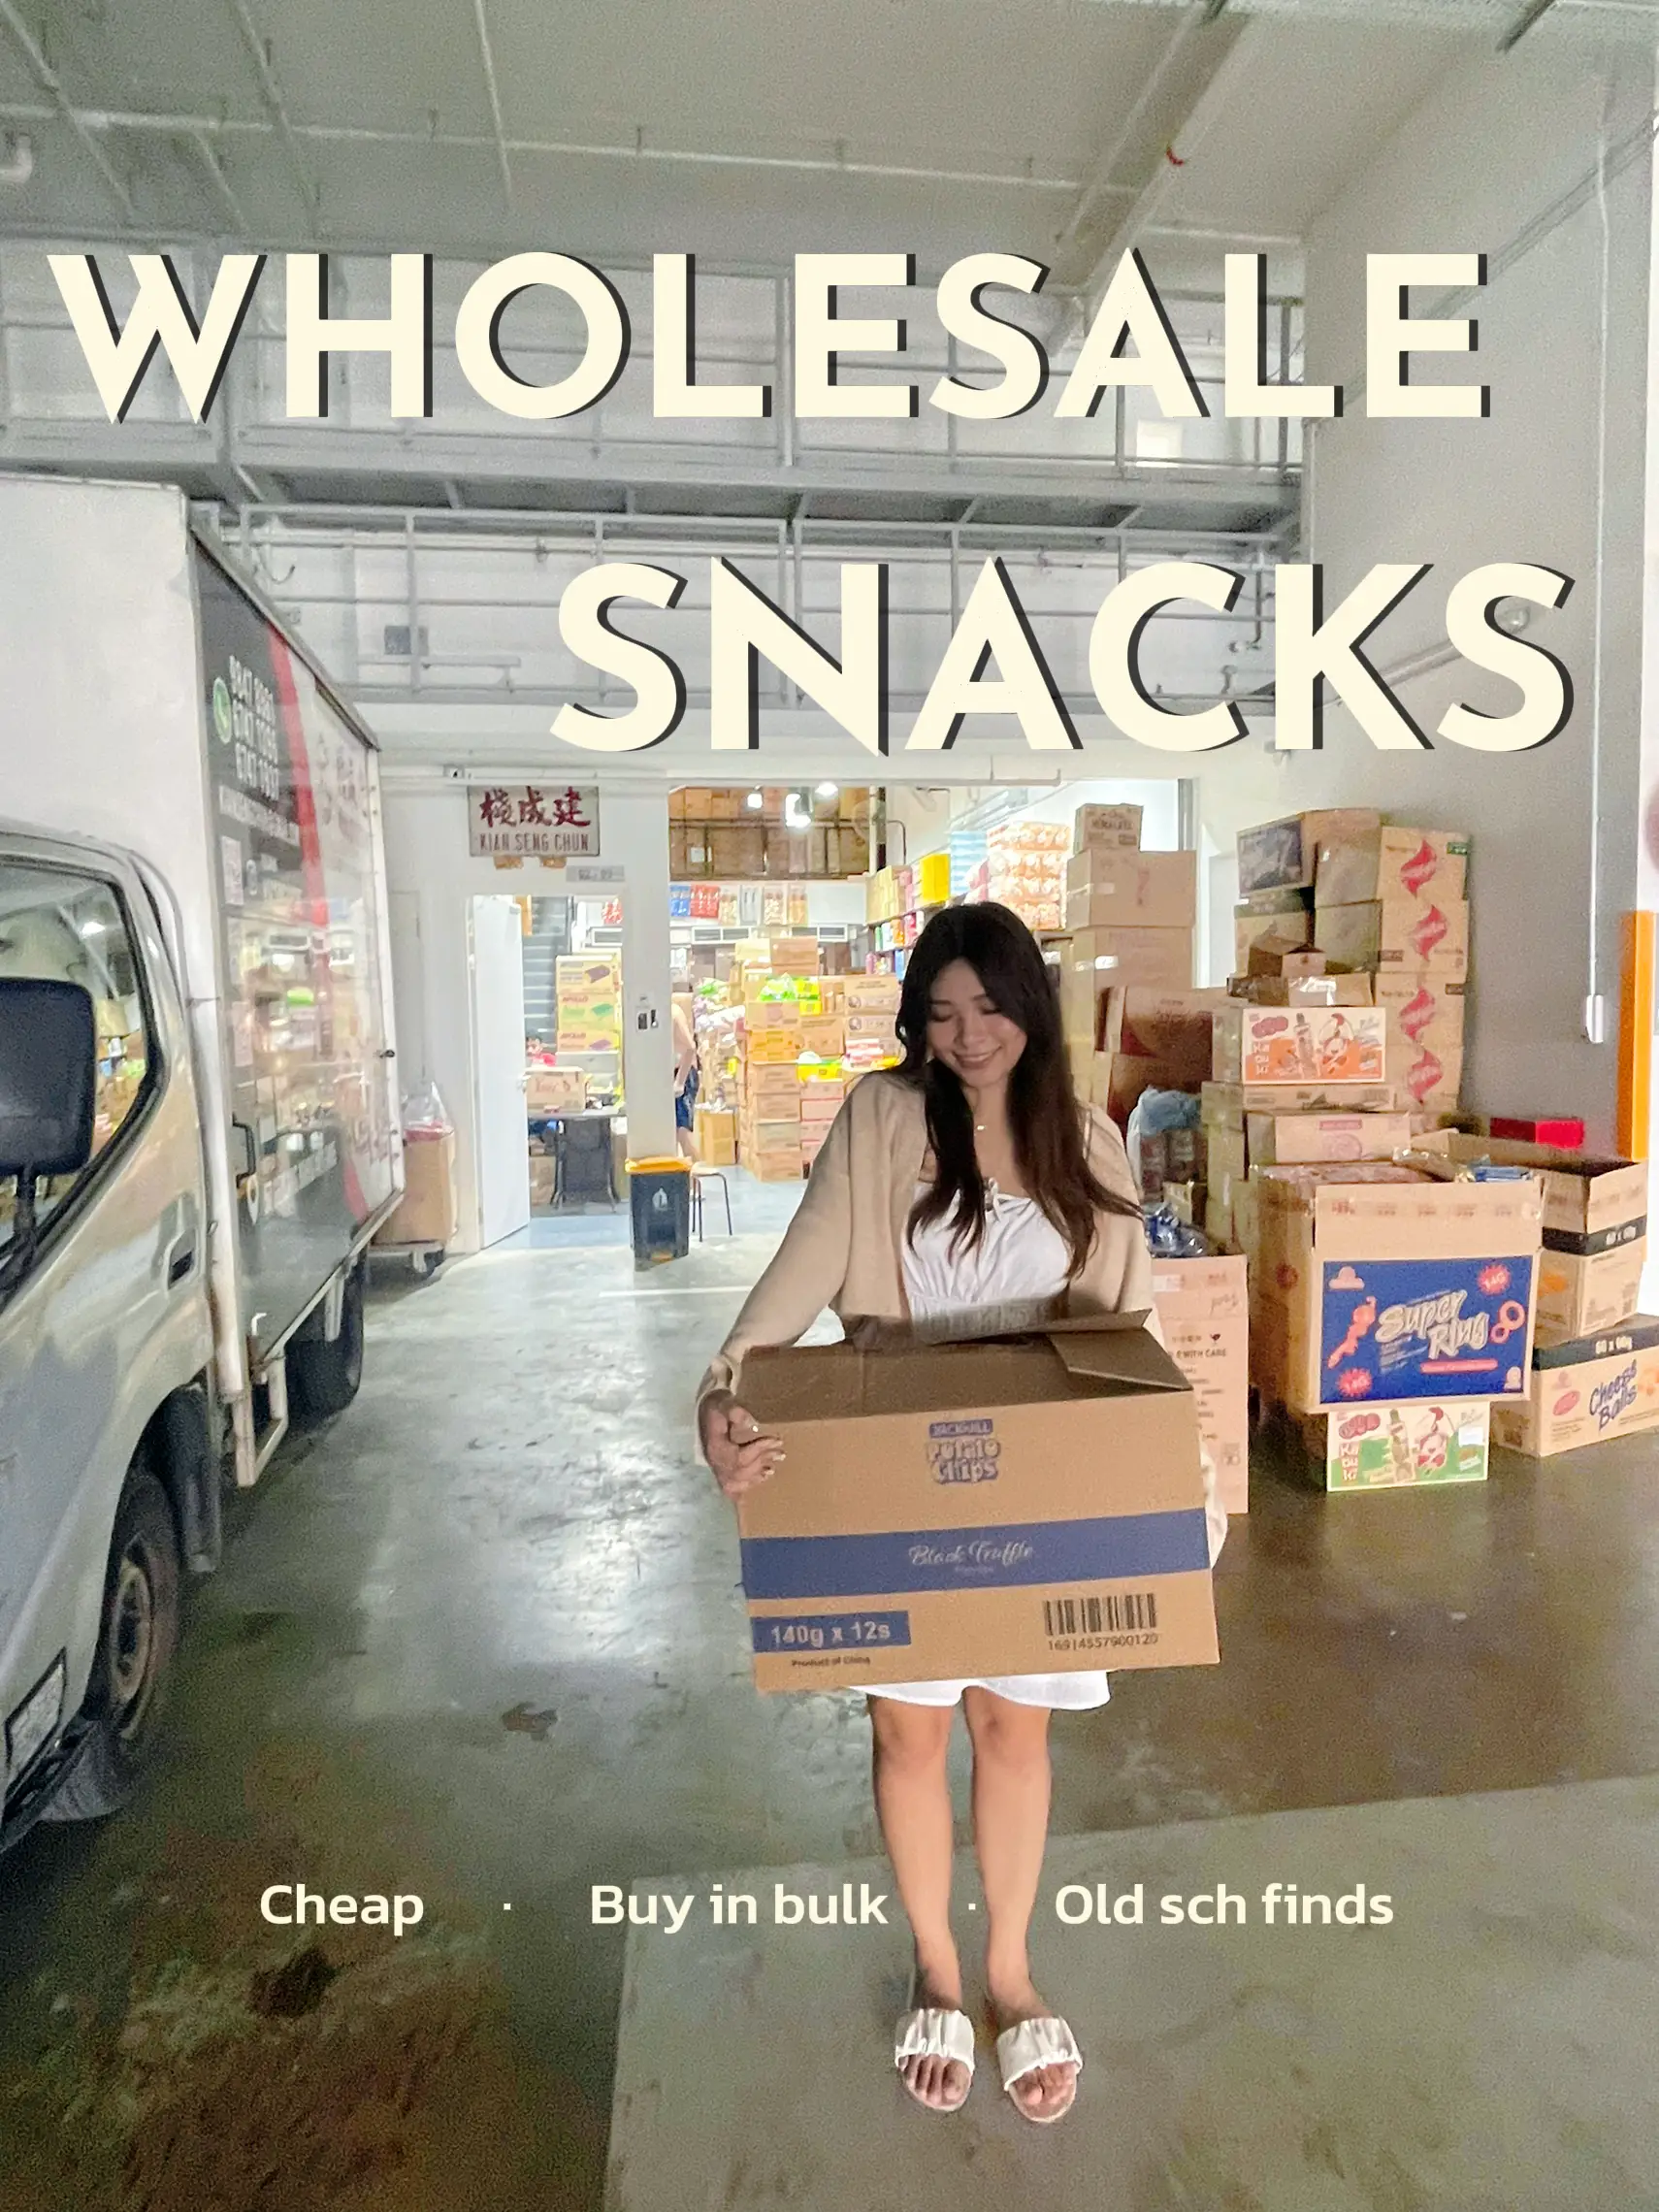 SNACK HEAVEN at a wholesale price 🤩's images(0)